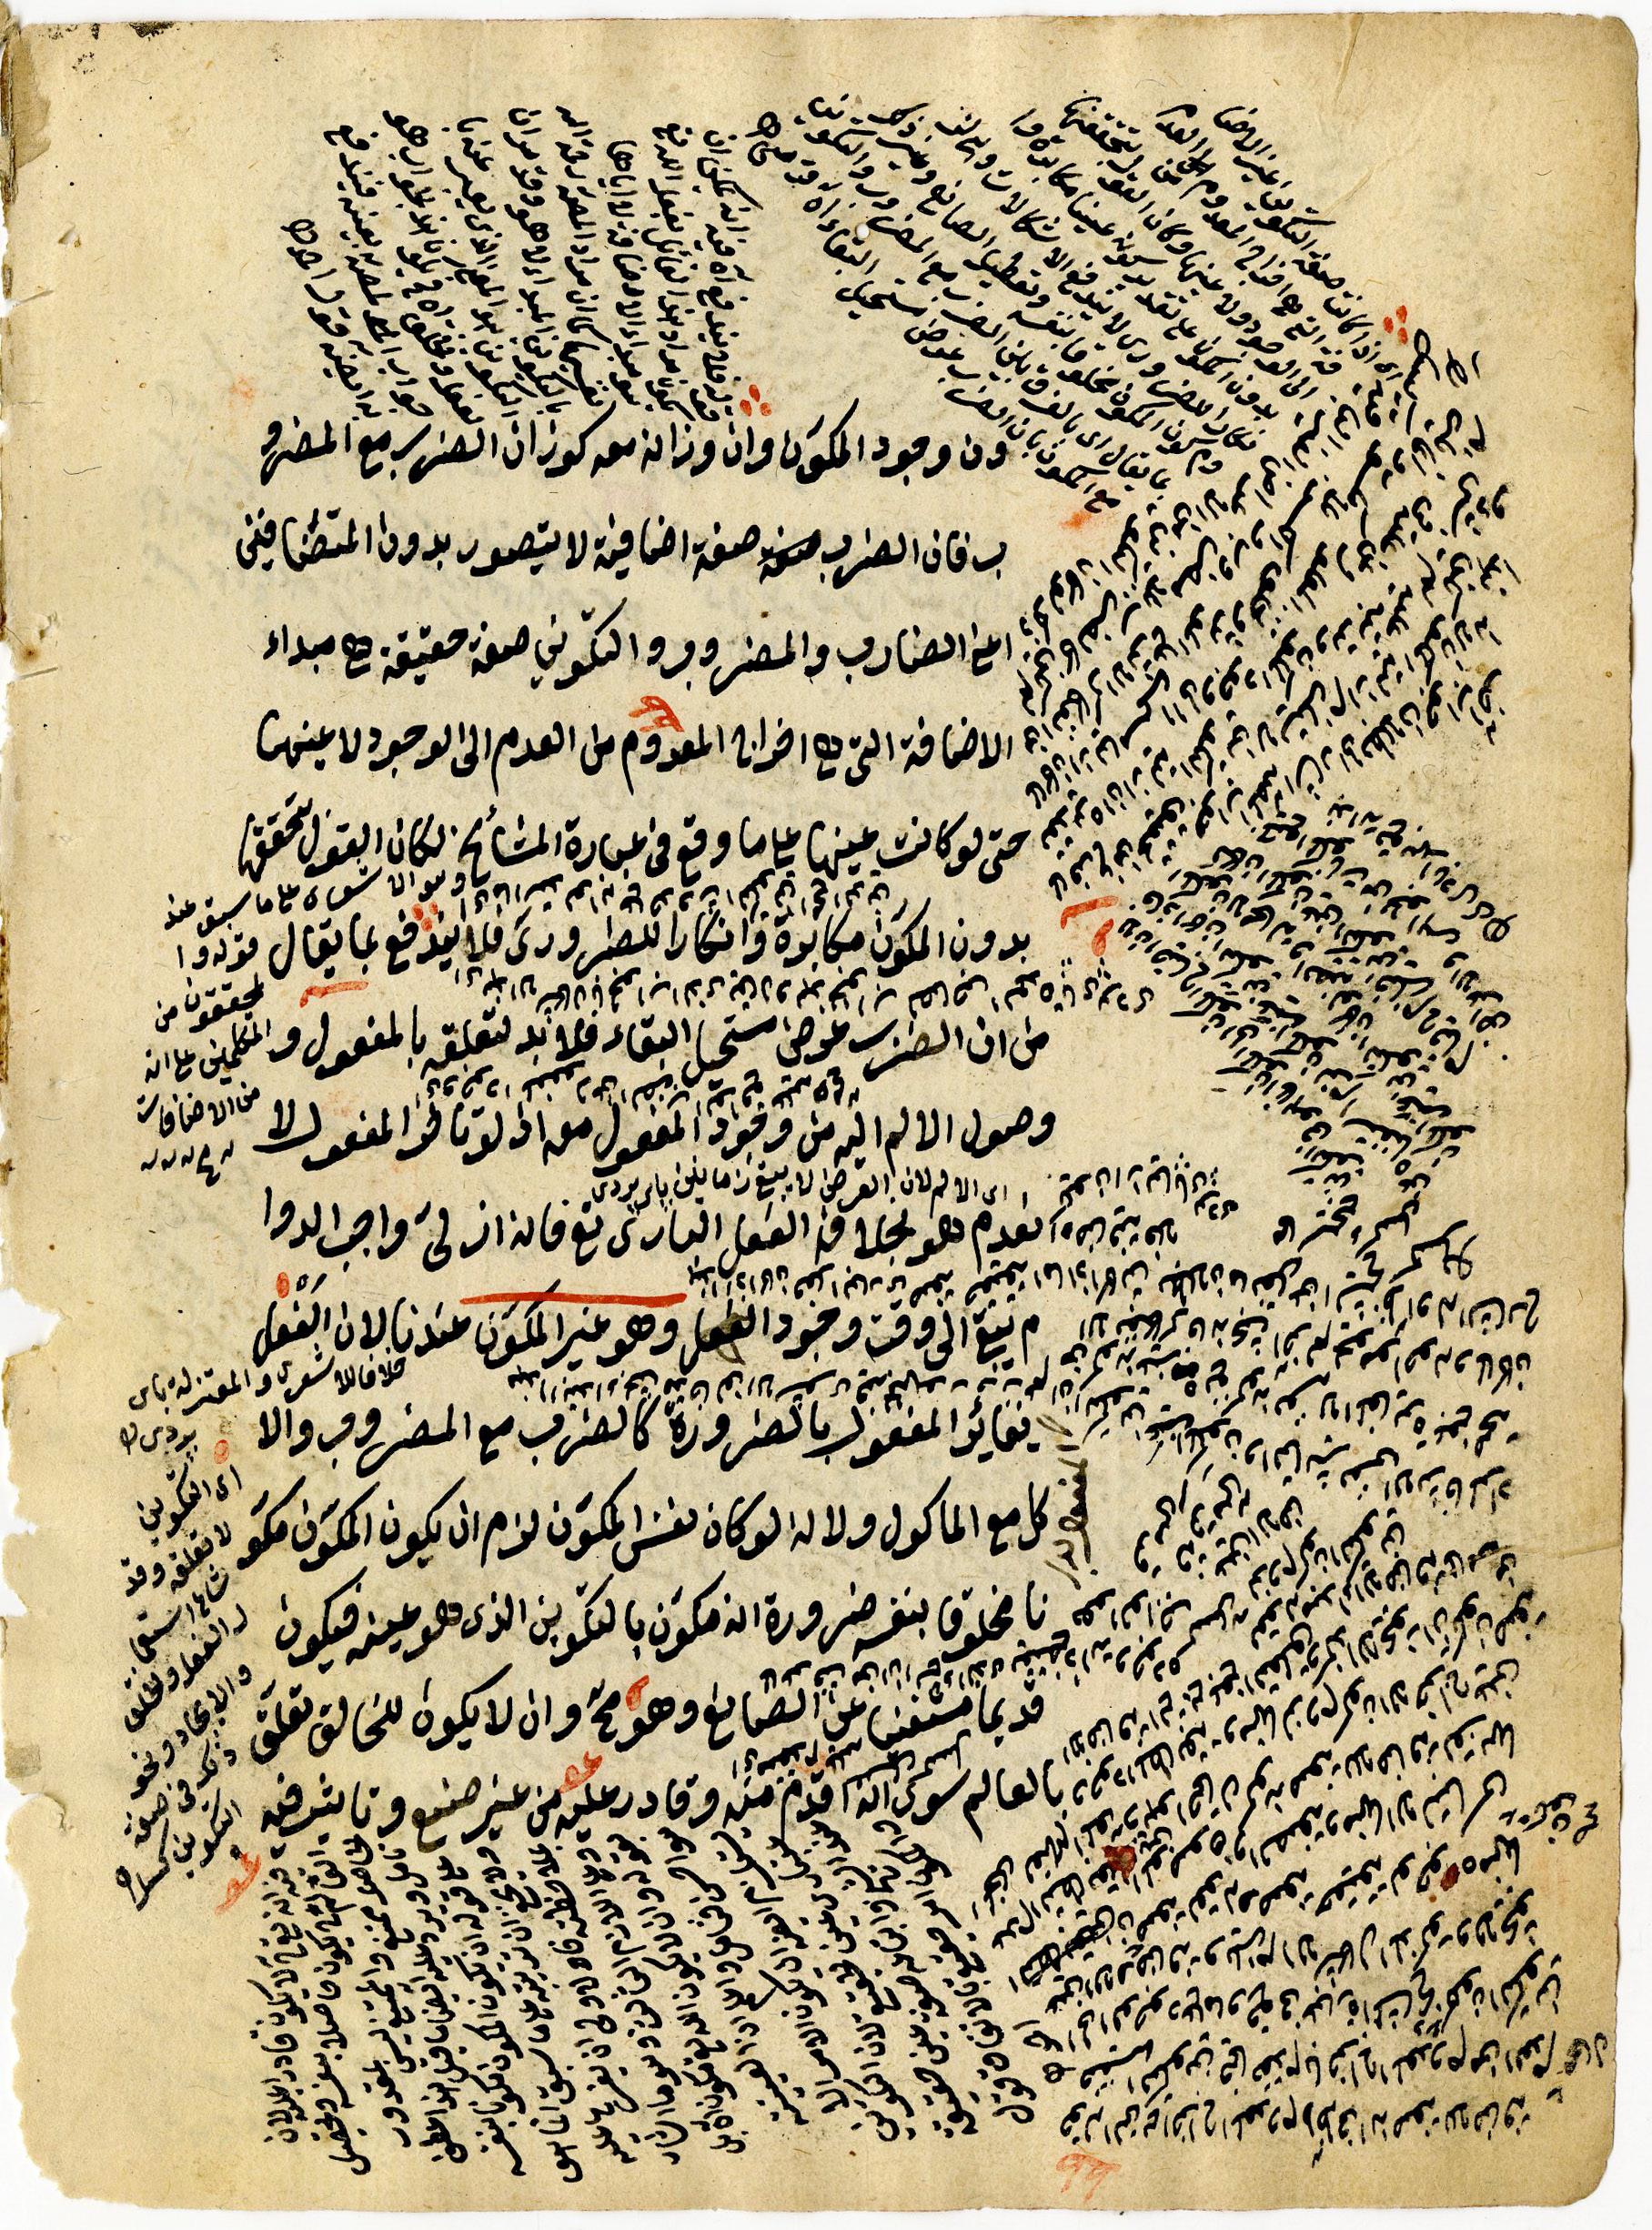 Unknown Abstract Drawing – 17th Century Anonymous Persian Philospohical text